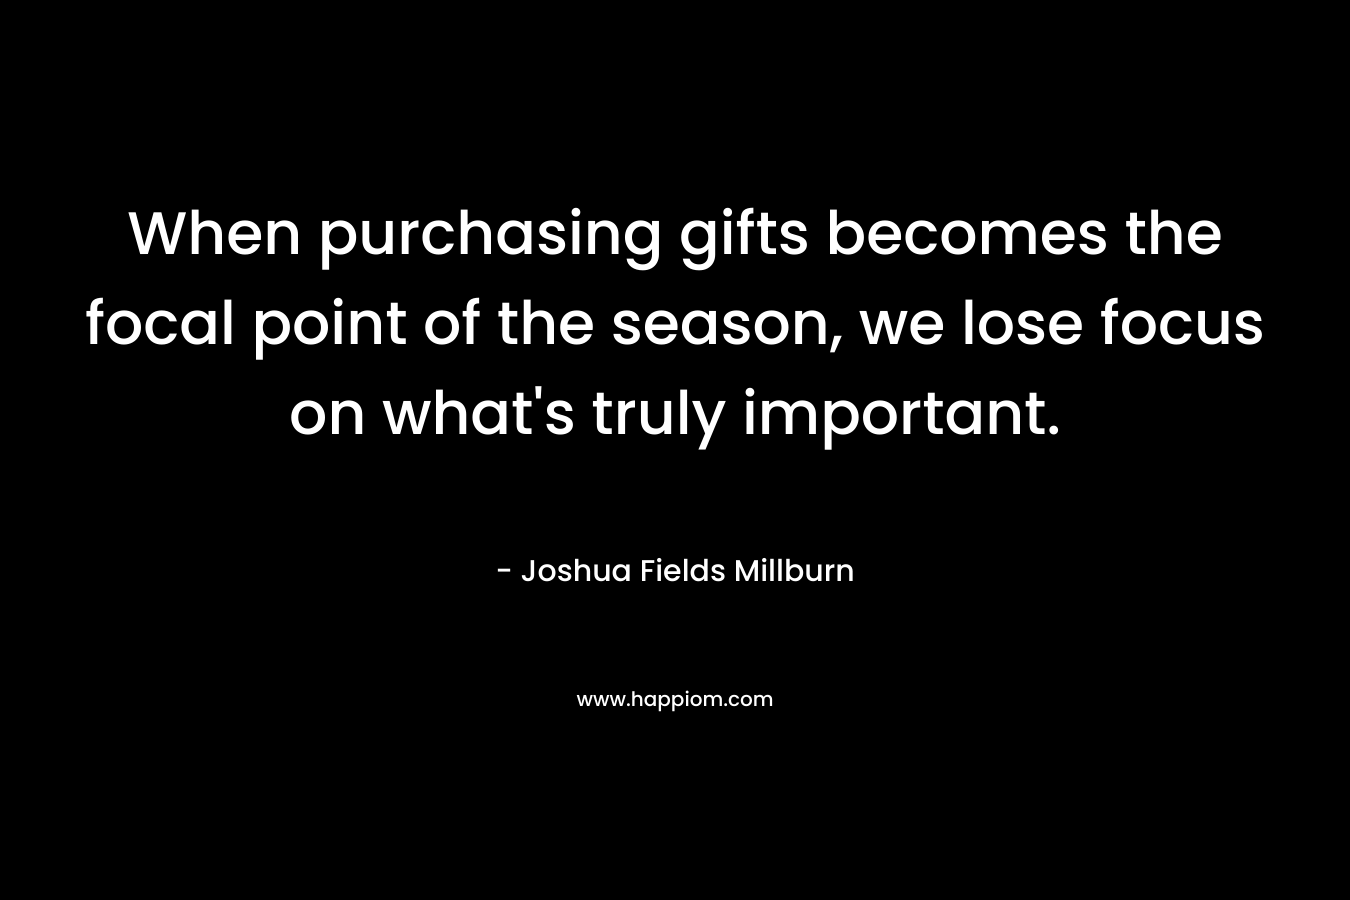 When purchasing gifts becomes the focal point of the season, we lose focus on what’s truly important. – Joshua Fields Millburn